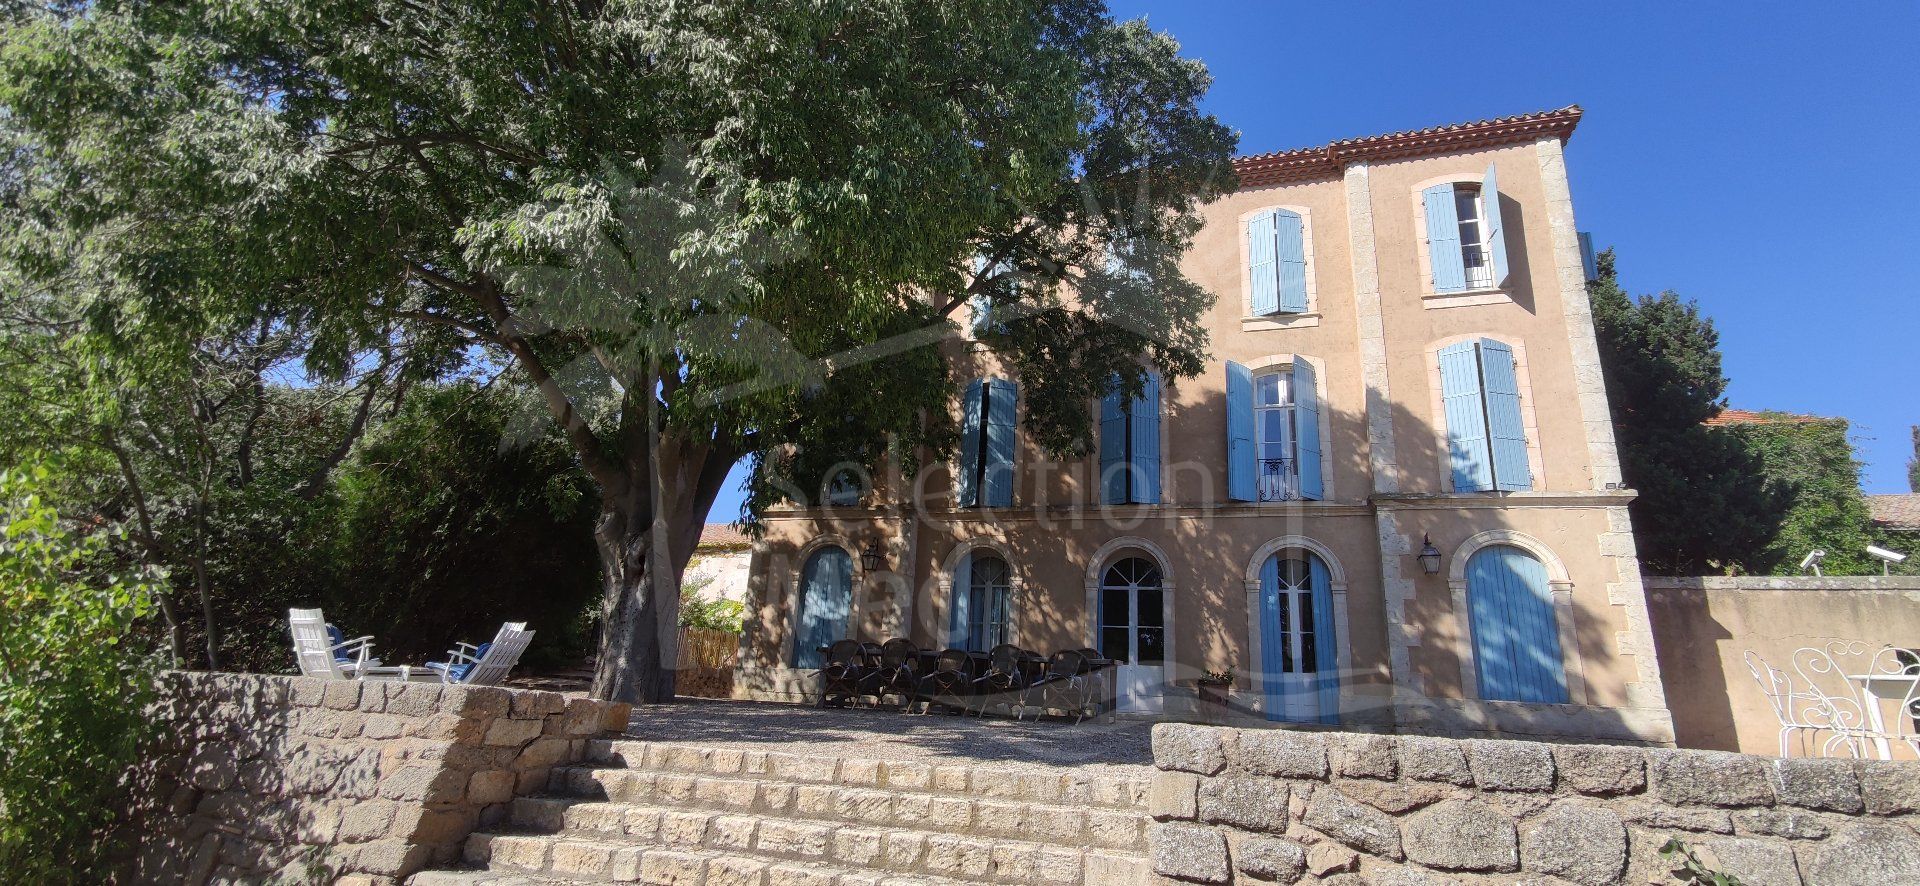 Exceptional mansion with 1.7ha park, 500m2 of living space, 350m2 outbuilding, 5km from Beziers, 10 mins from the beach